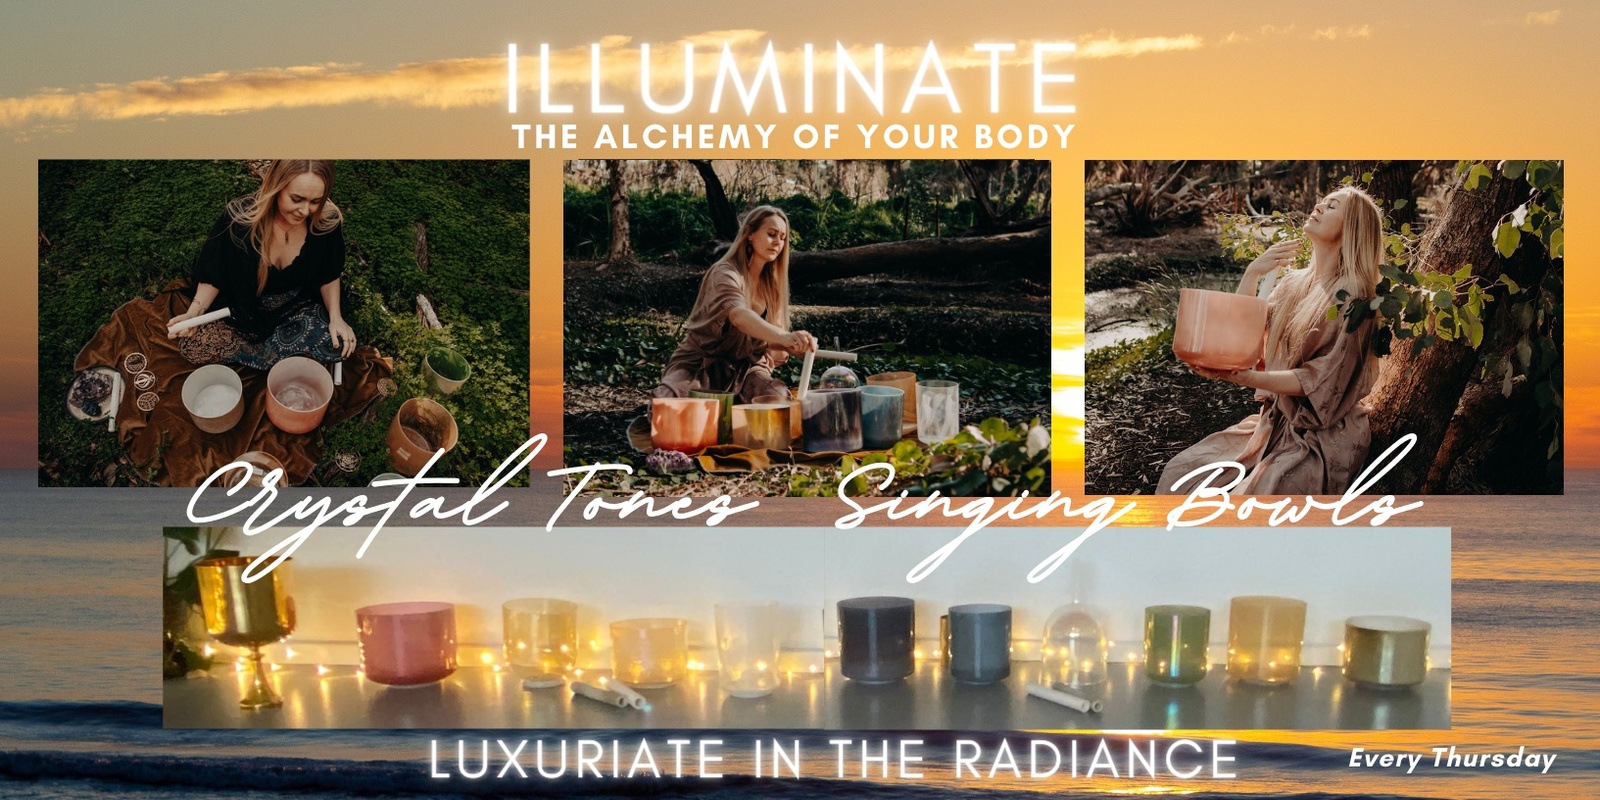 Banner image for Sound Healing • 𝗔𝗹𝗰𝗵𝗲𝗺𝘆 𝗤𝘂𝗮𝗿𝘁𝘇 𝗖𝗿𝘆𝘀𝘁𝗮𝗹 𝗧𝗼𝗻𝗲𝘀 𝗦𝗶𝗻𝗴𝗶𝗻𝗴 𝗕𝗼𝘄𝗹𝘀 • Luxuriate in the Radiance • 